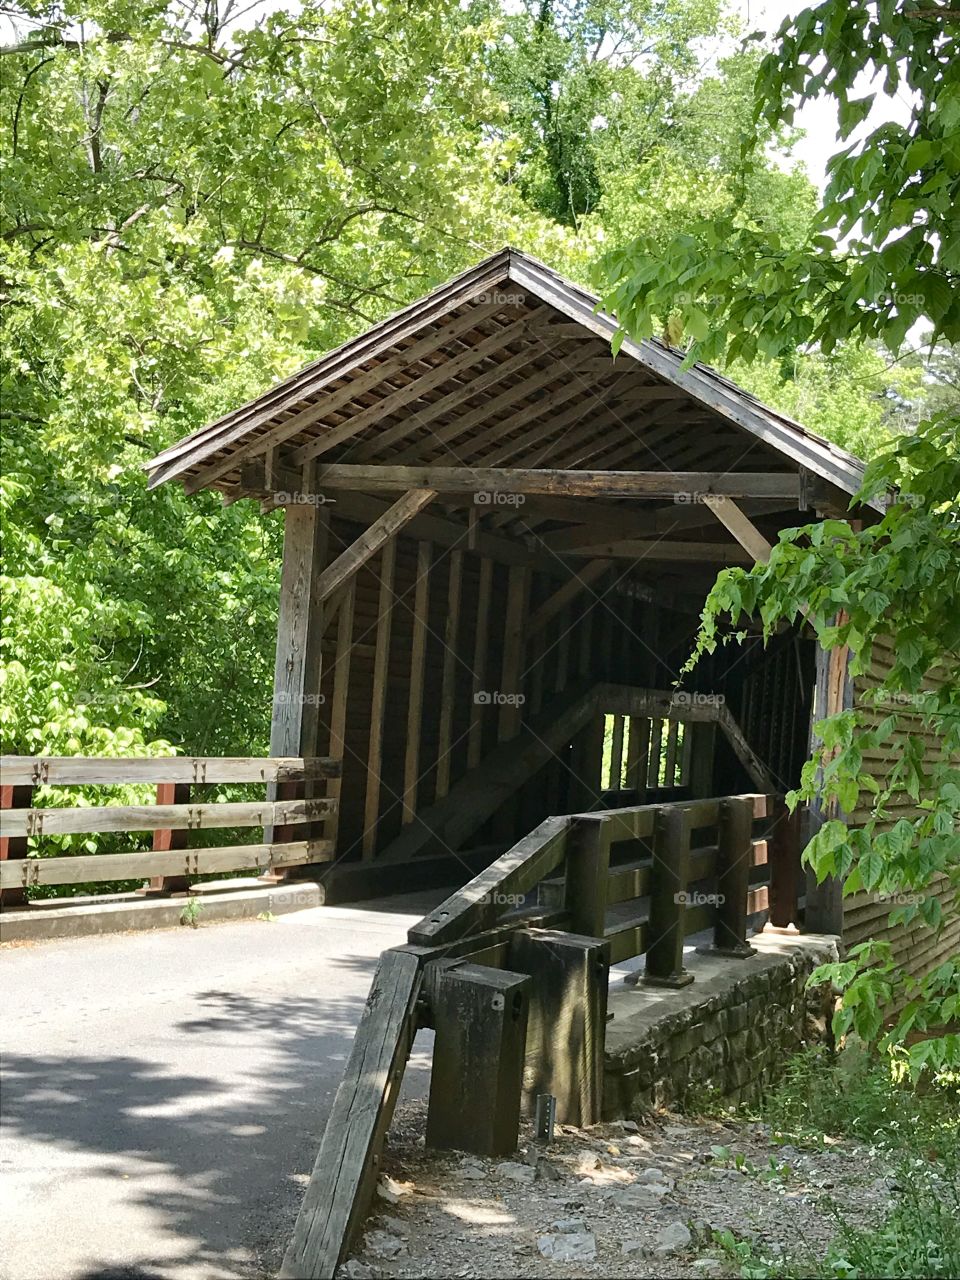 Getting ready to drive through this Covered Bridge